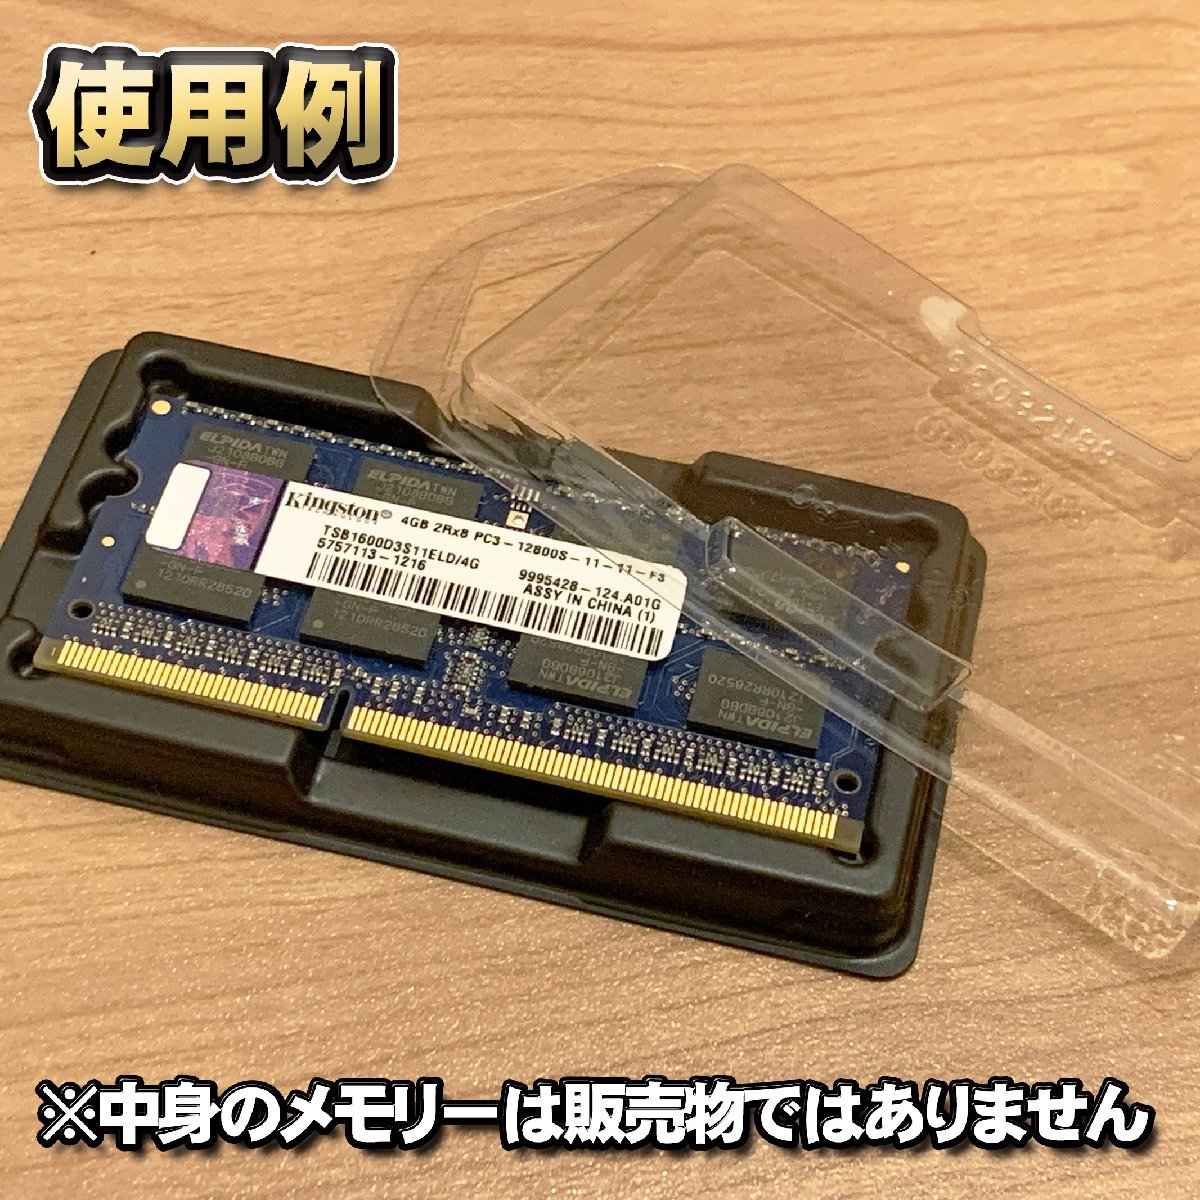 [Type-A][ DDR2 correspondence ] cover attaching Note PC memory shell case S.O.DIMM for plastic storage storage case 20 pieces set 